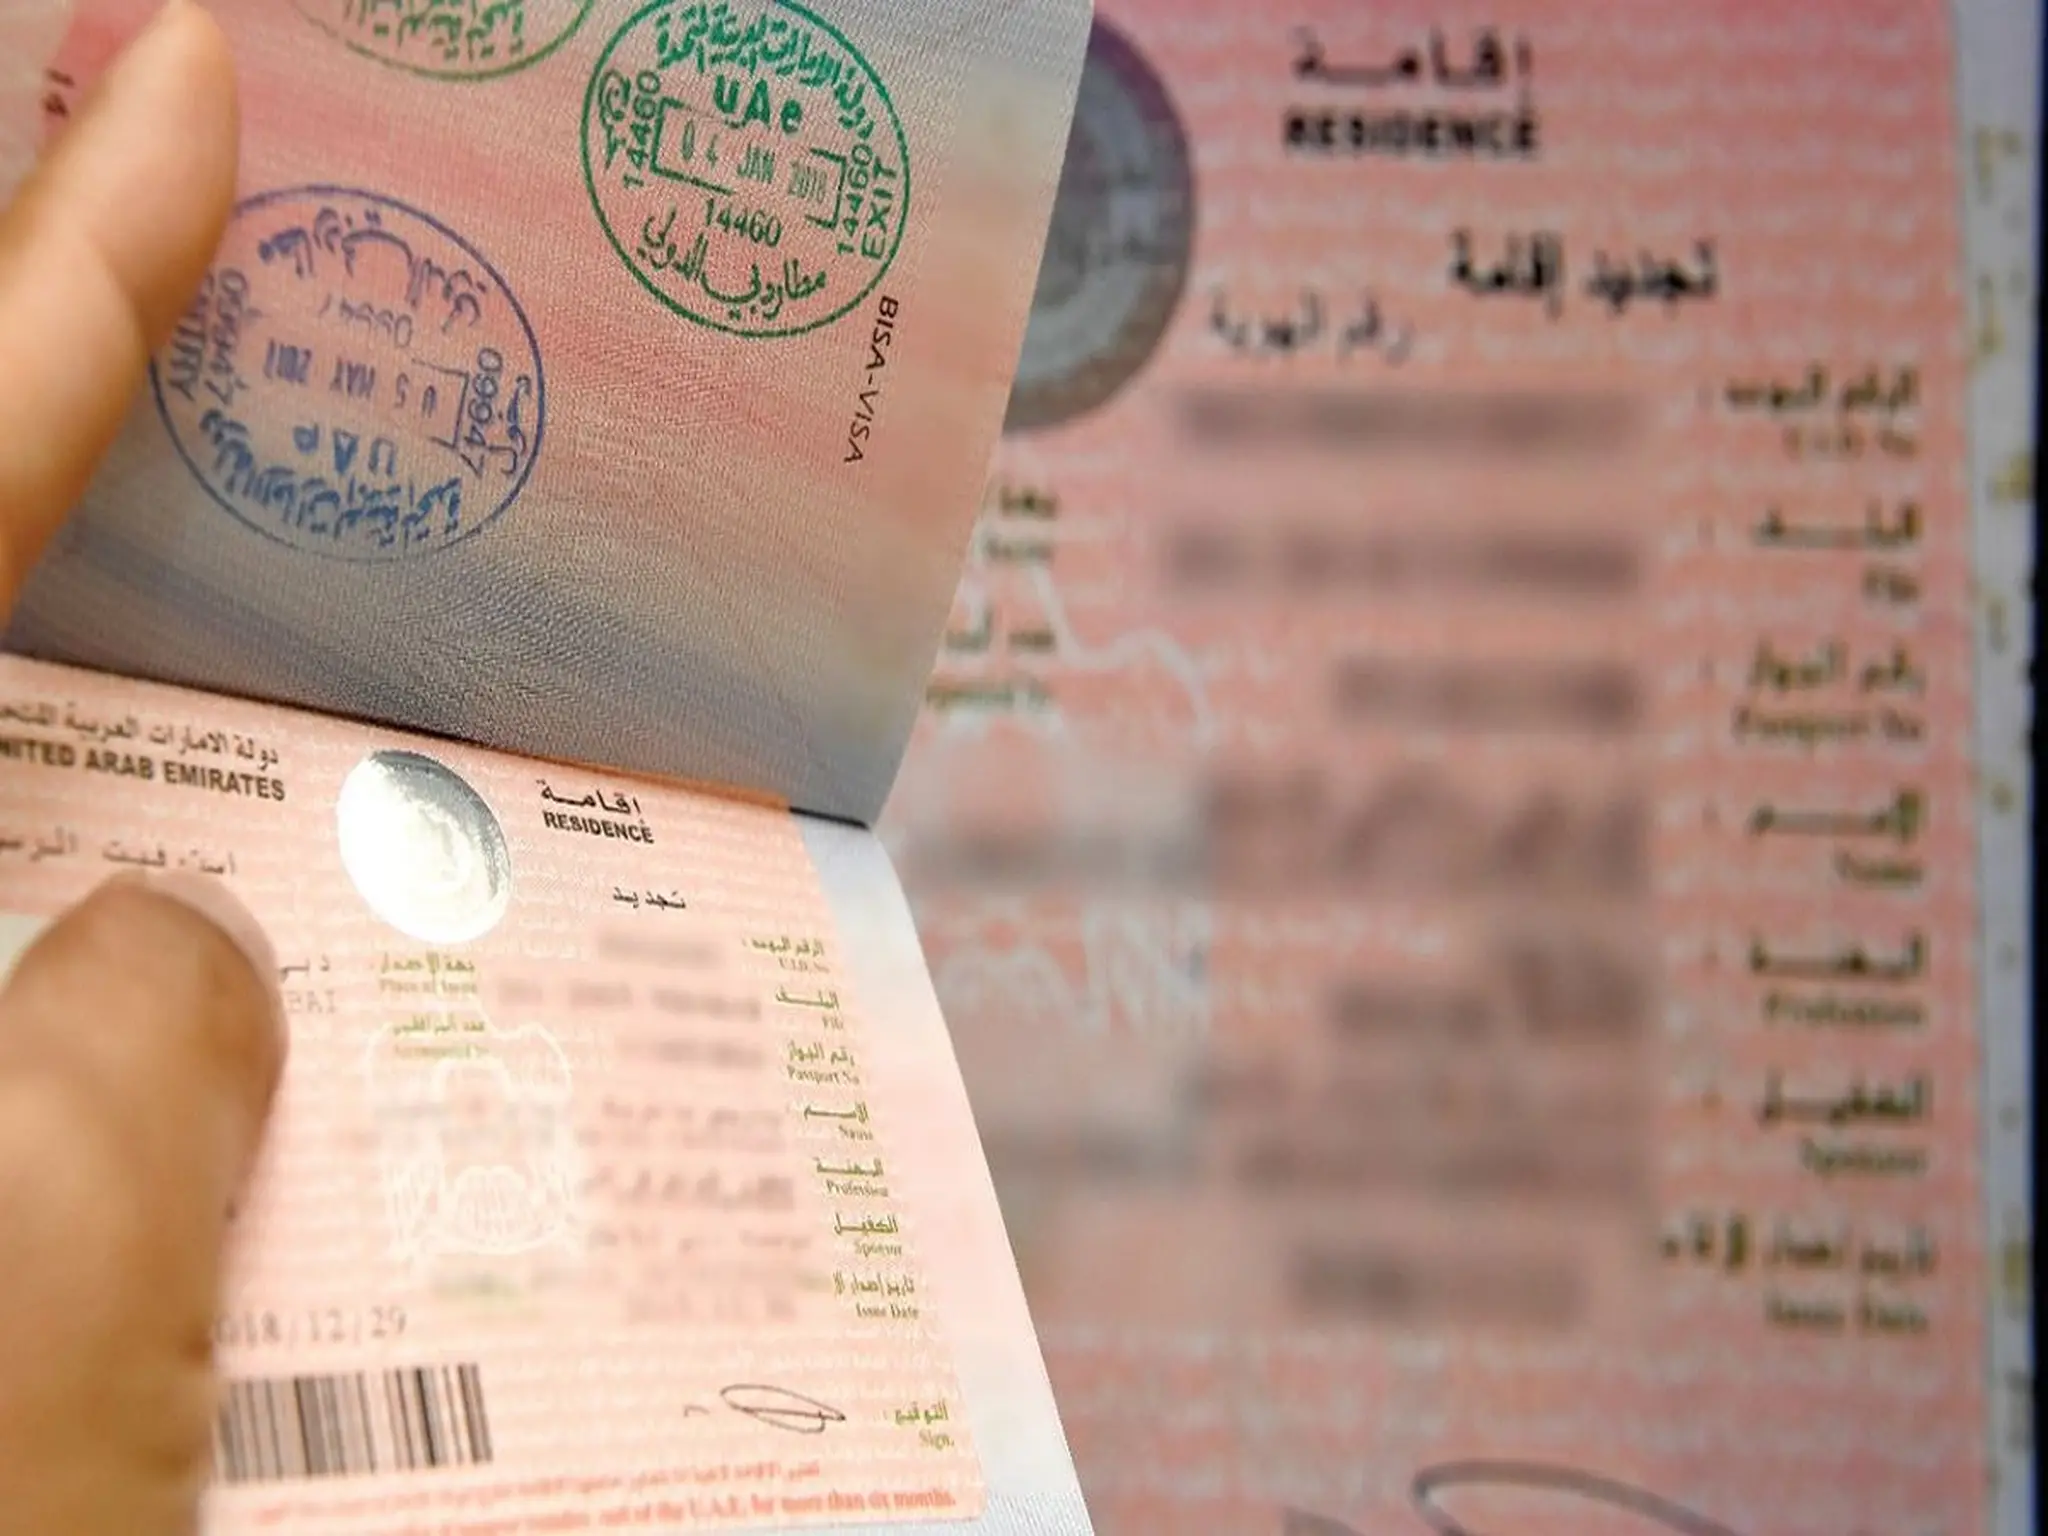 The UAE issues a warning and a prison sentence regarding visas and residence permits for residents